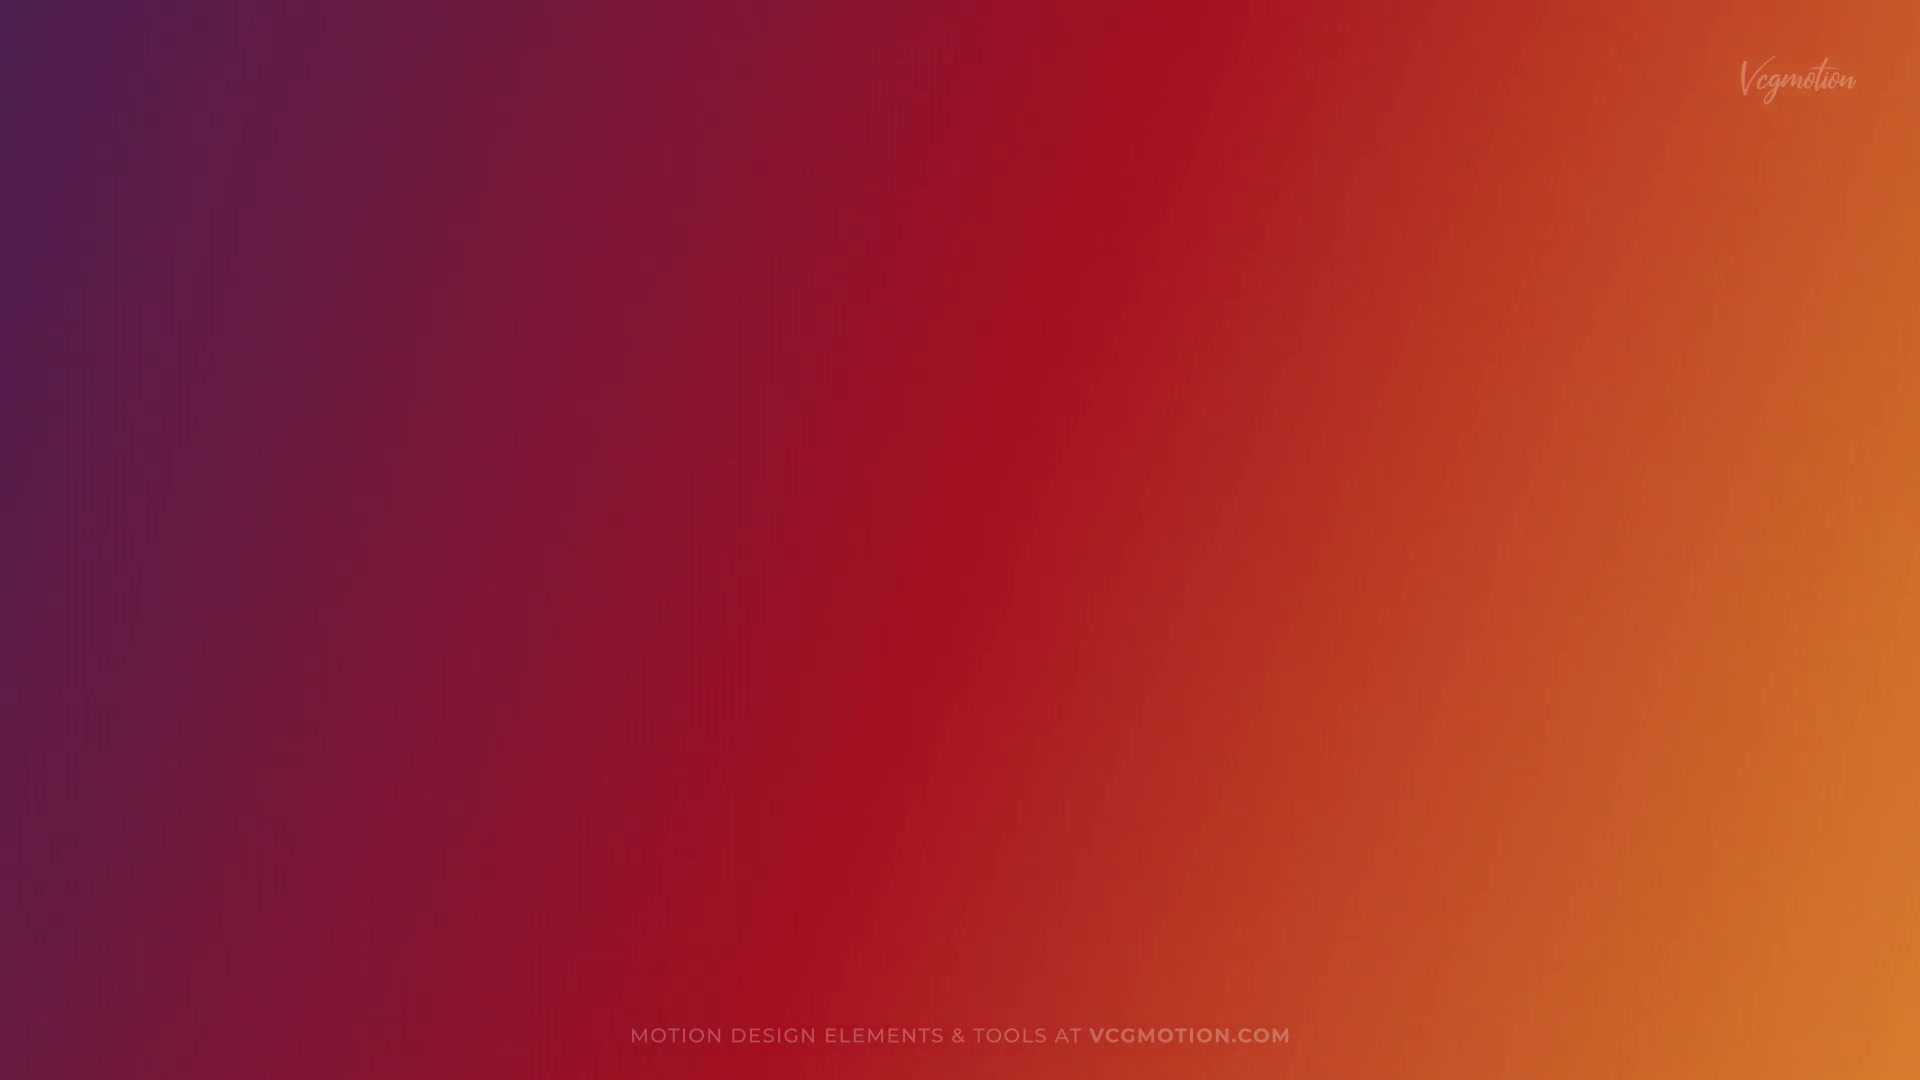 gradient ramp after effects cs6 free download